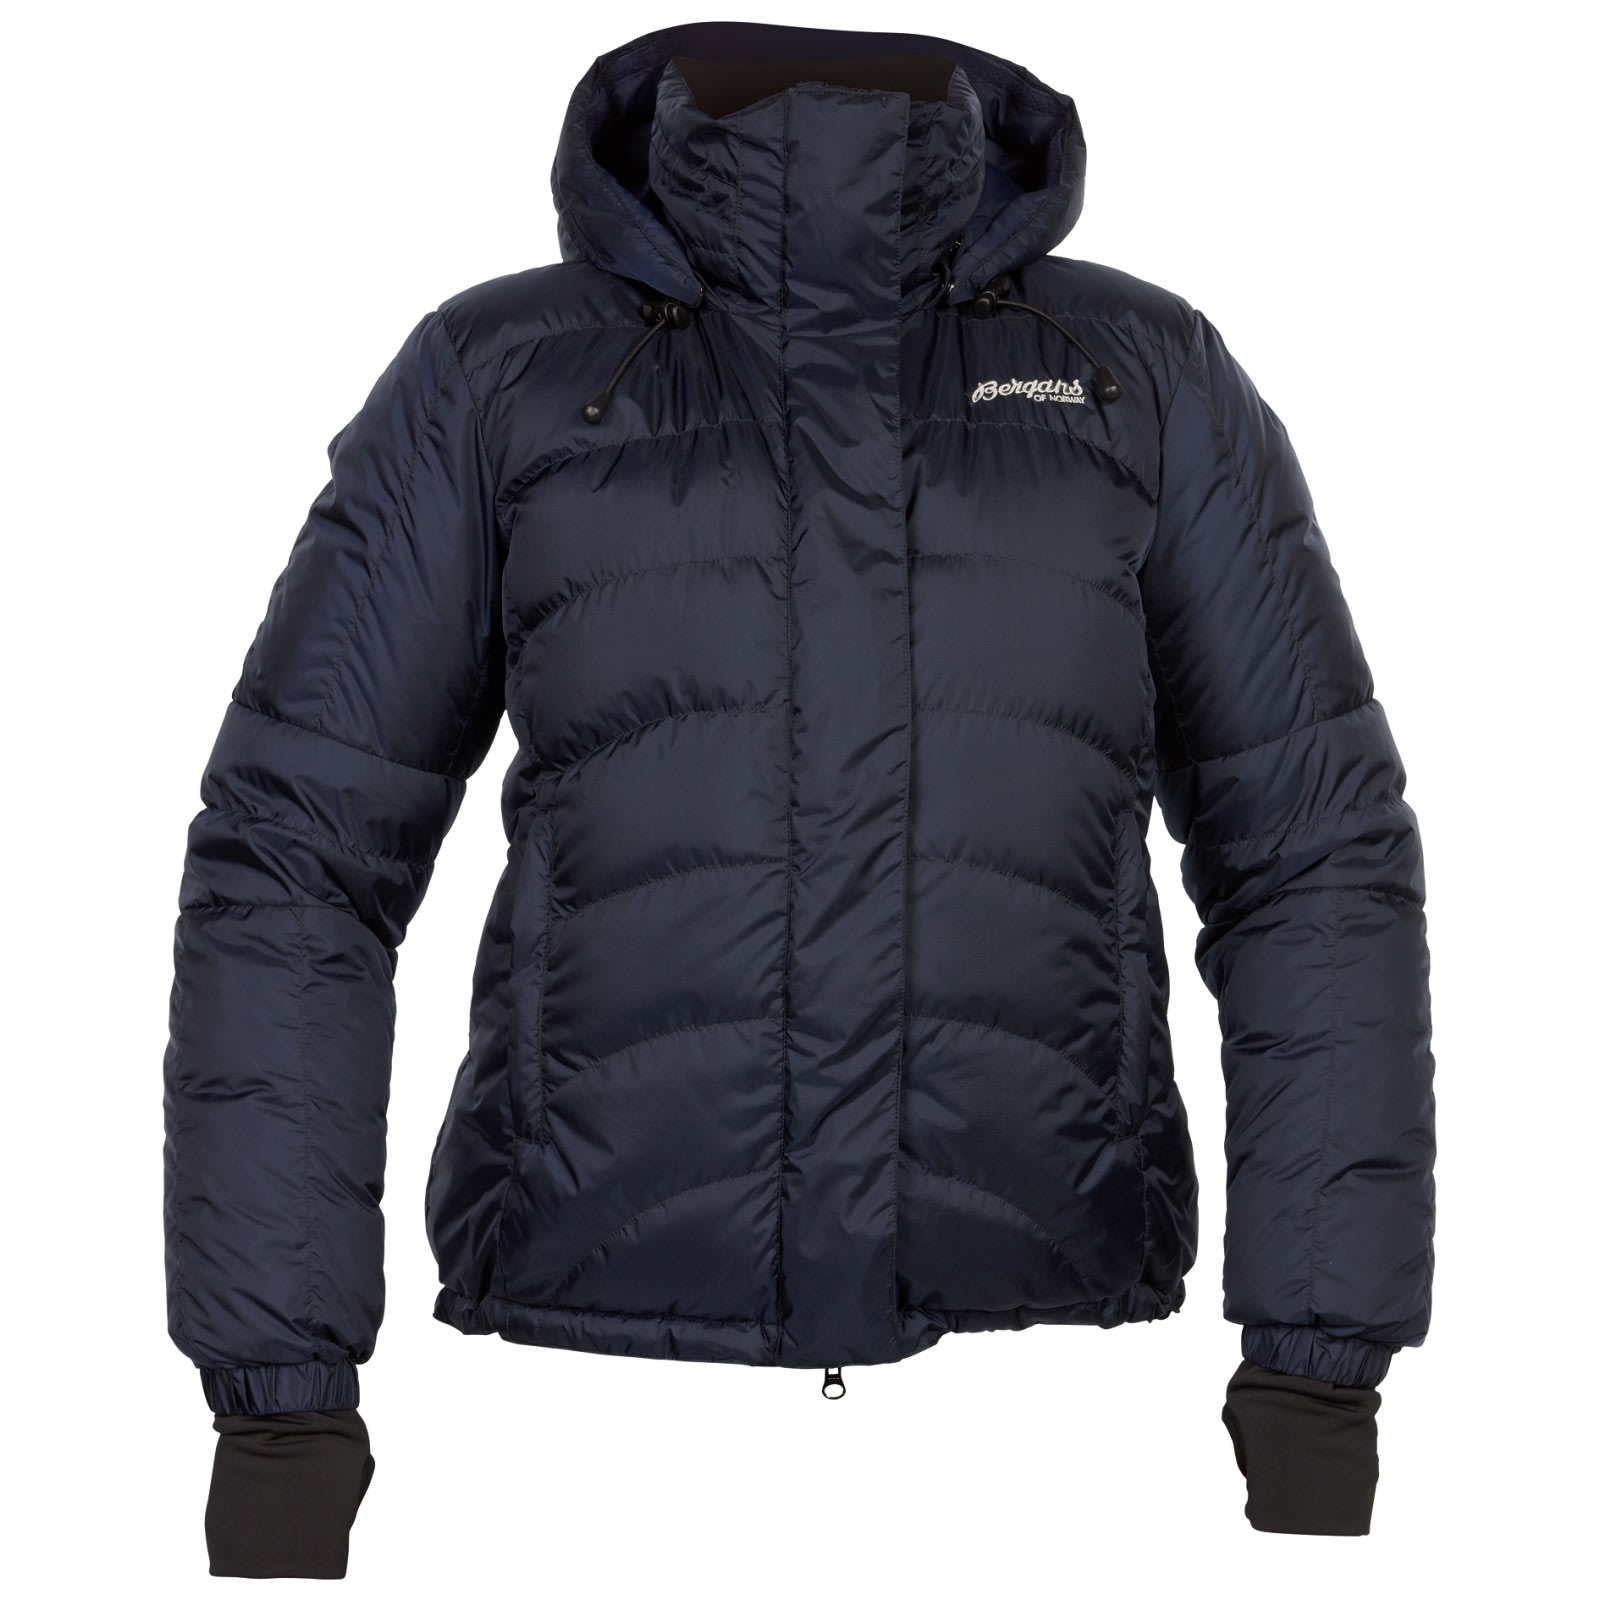 Buy Bergans Lady Jacket from Outnorth